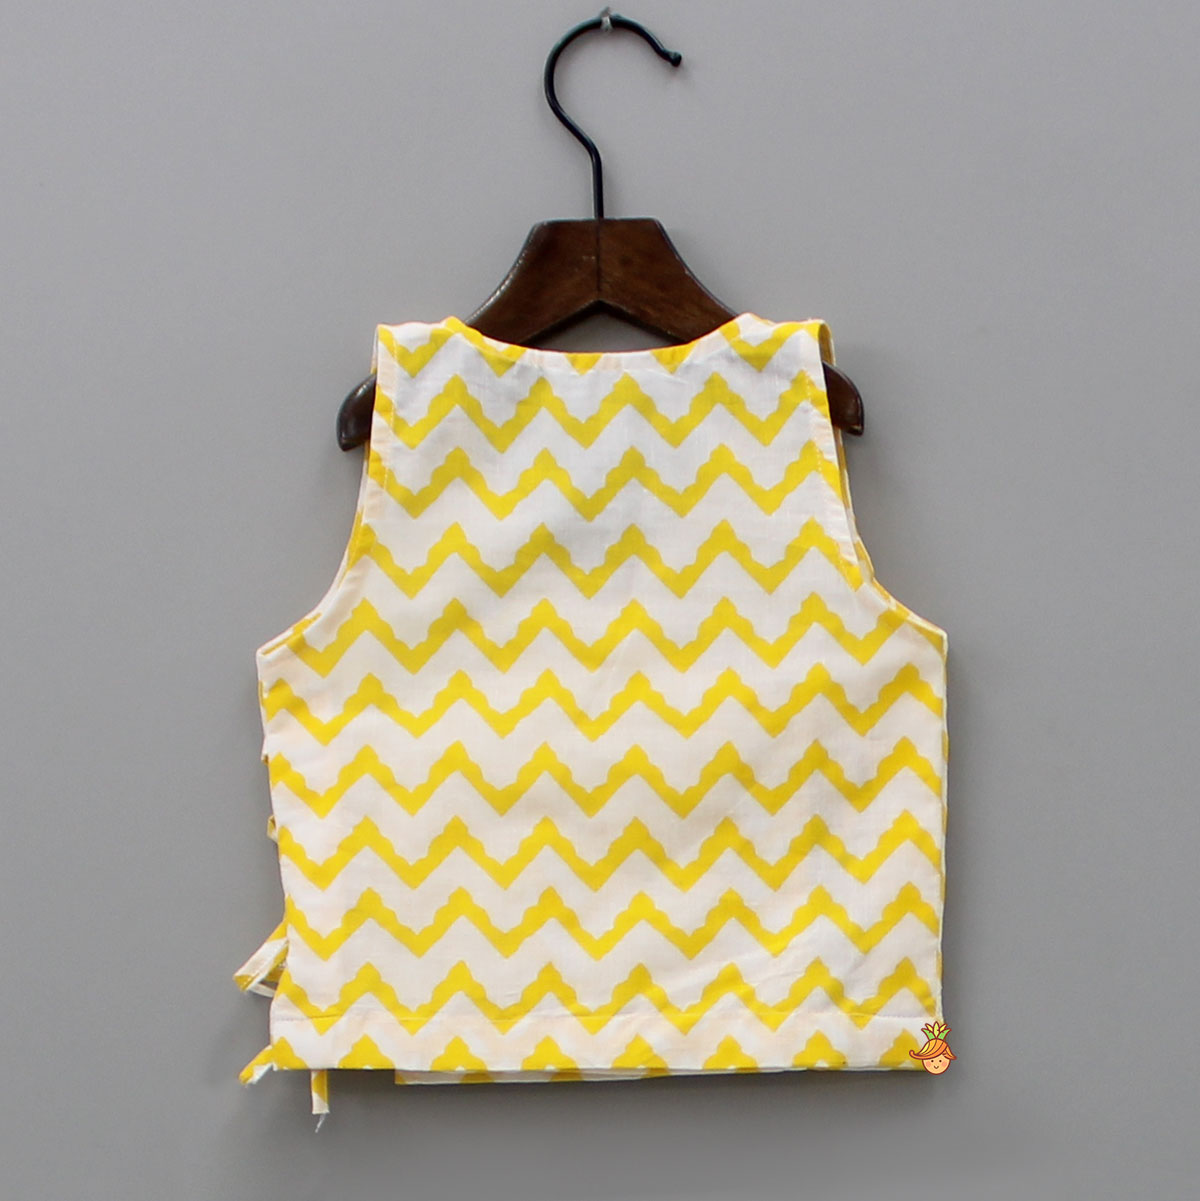 Chevron Printed Yellow and White Jhabla with Triple Side Knot